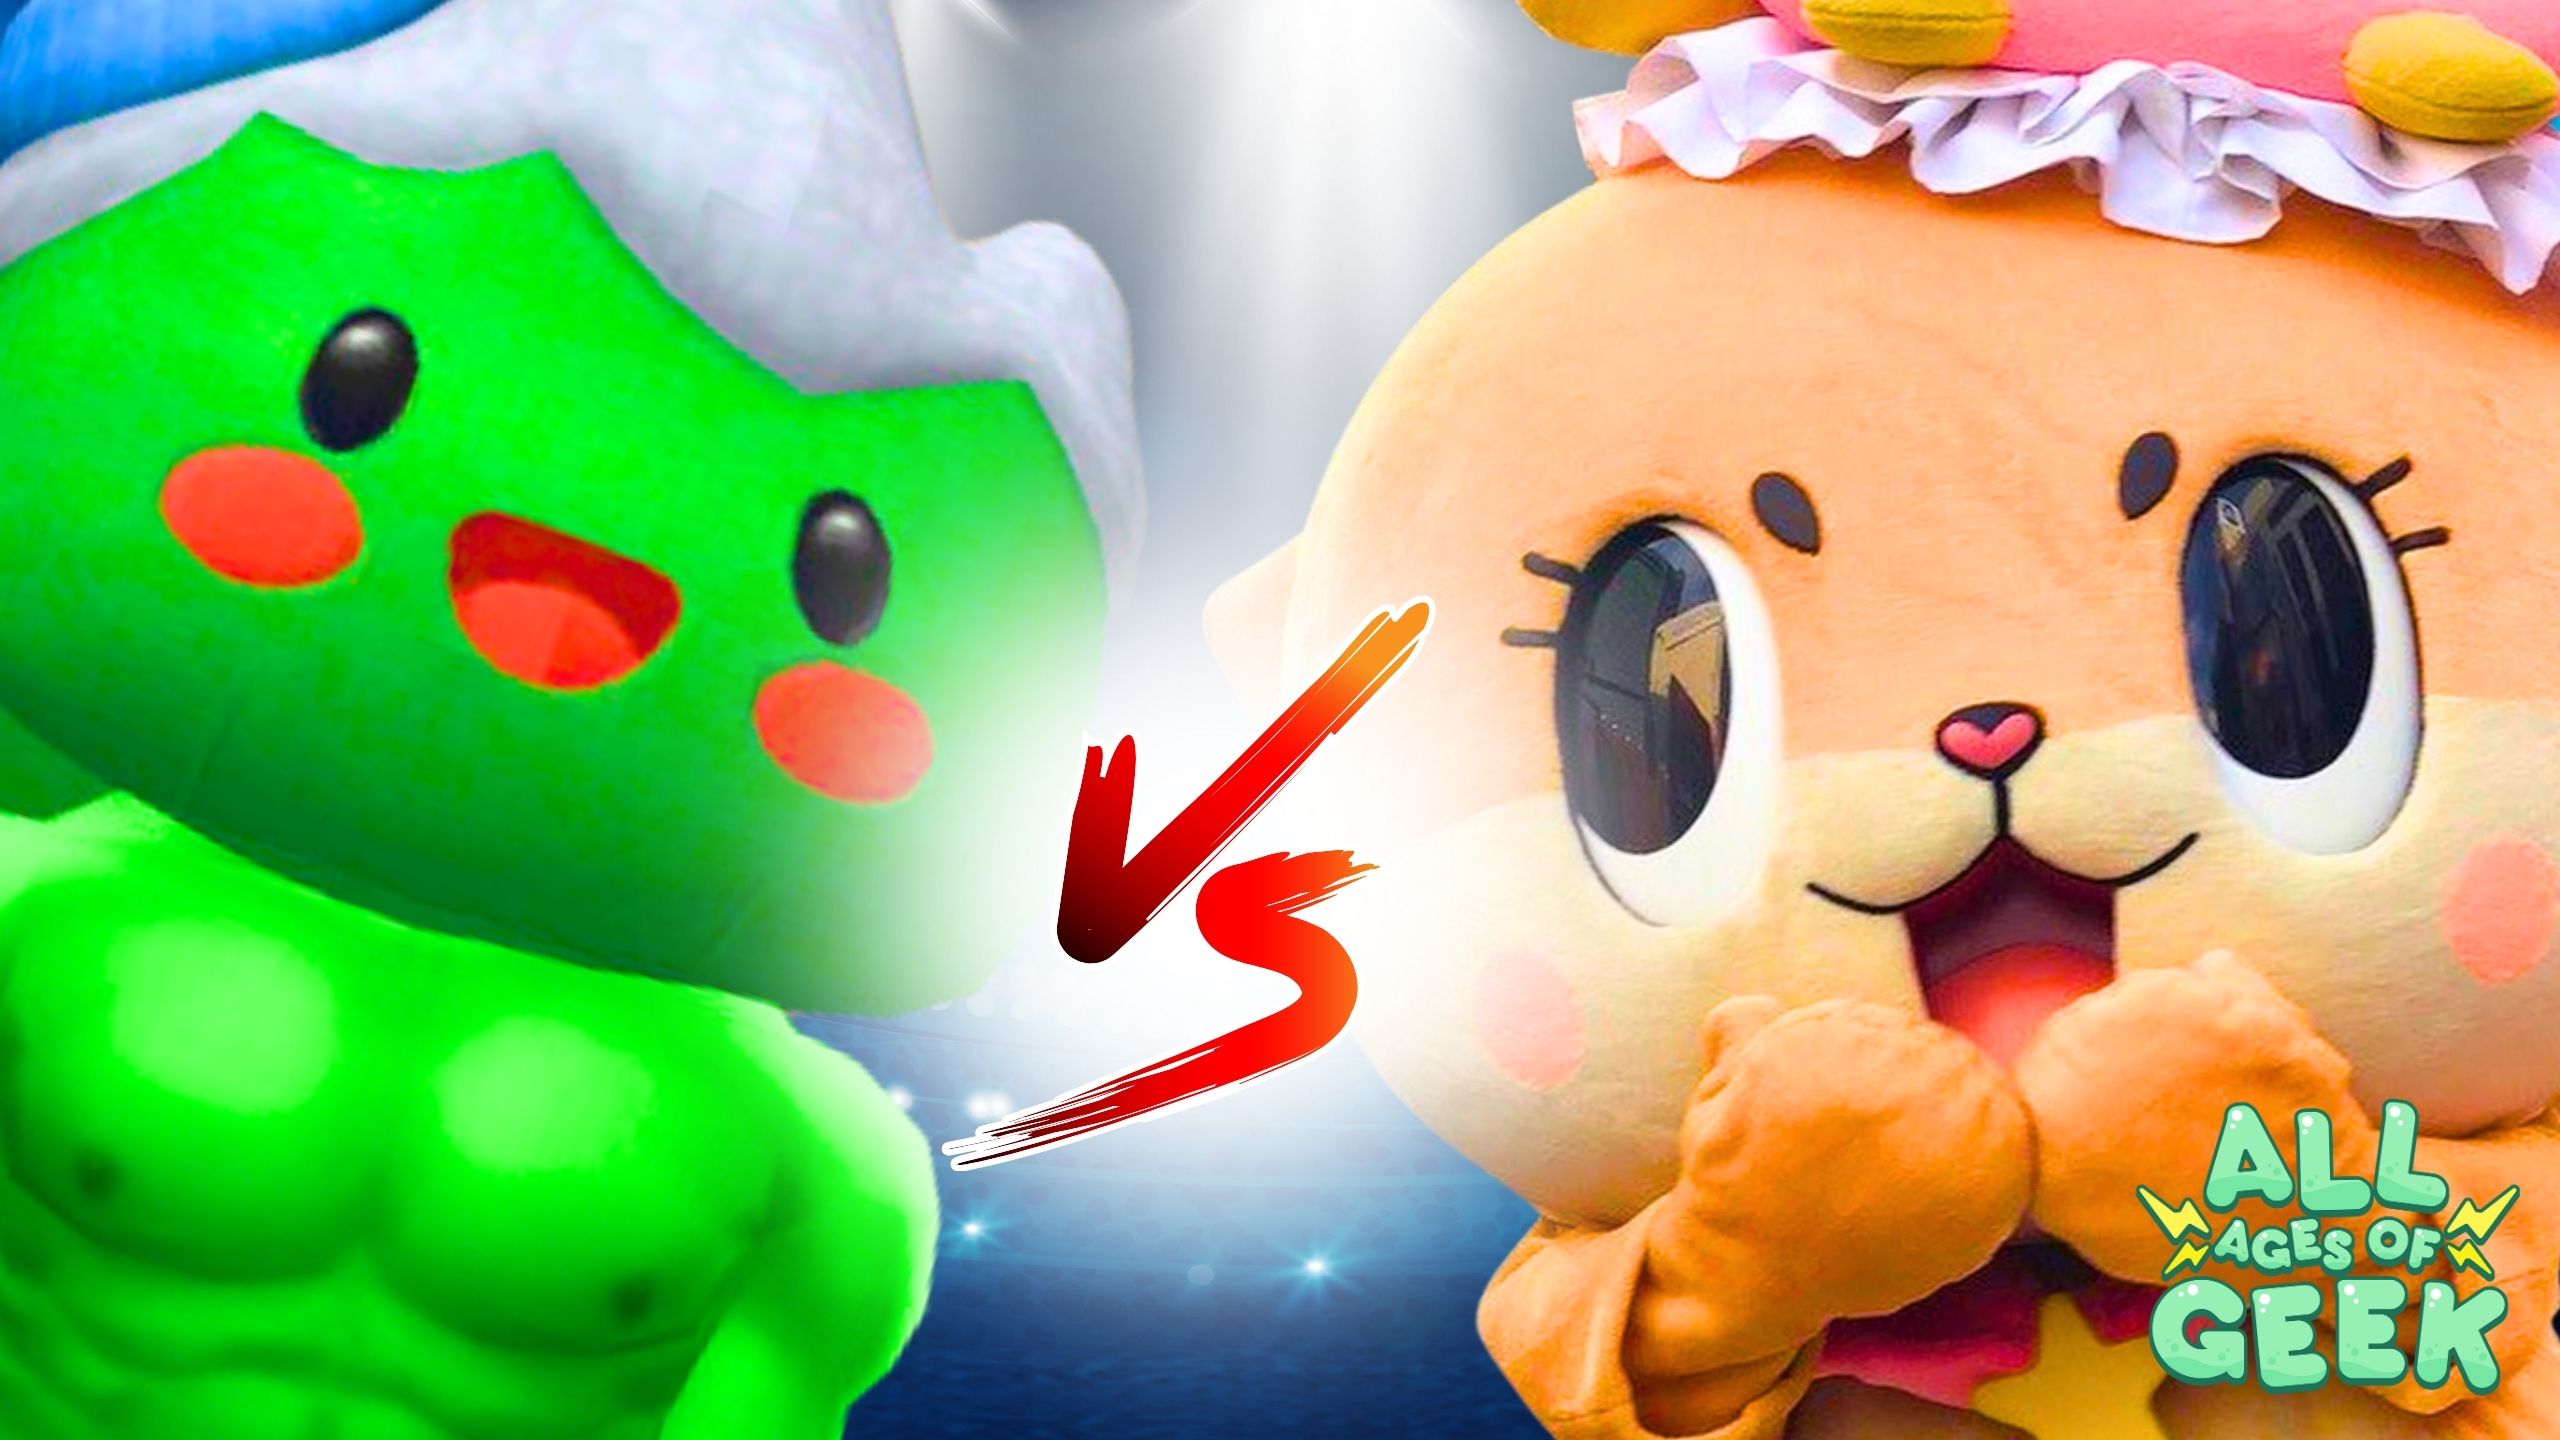 Showdown image featuring Yamachan from The Sims on the left and Chiitan, Japan's wild mascot, on the right. The 'VS' symbol is prominently displayed in the center. The All Ages of Geek logo is visible in the bottom right corner